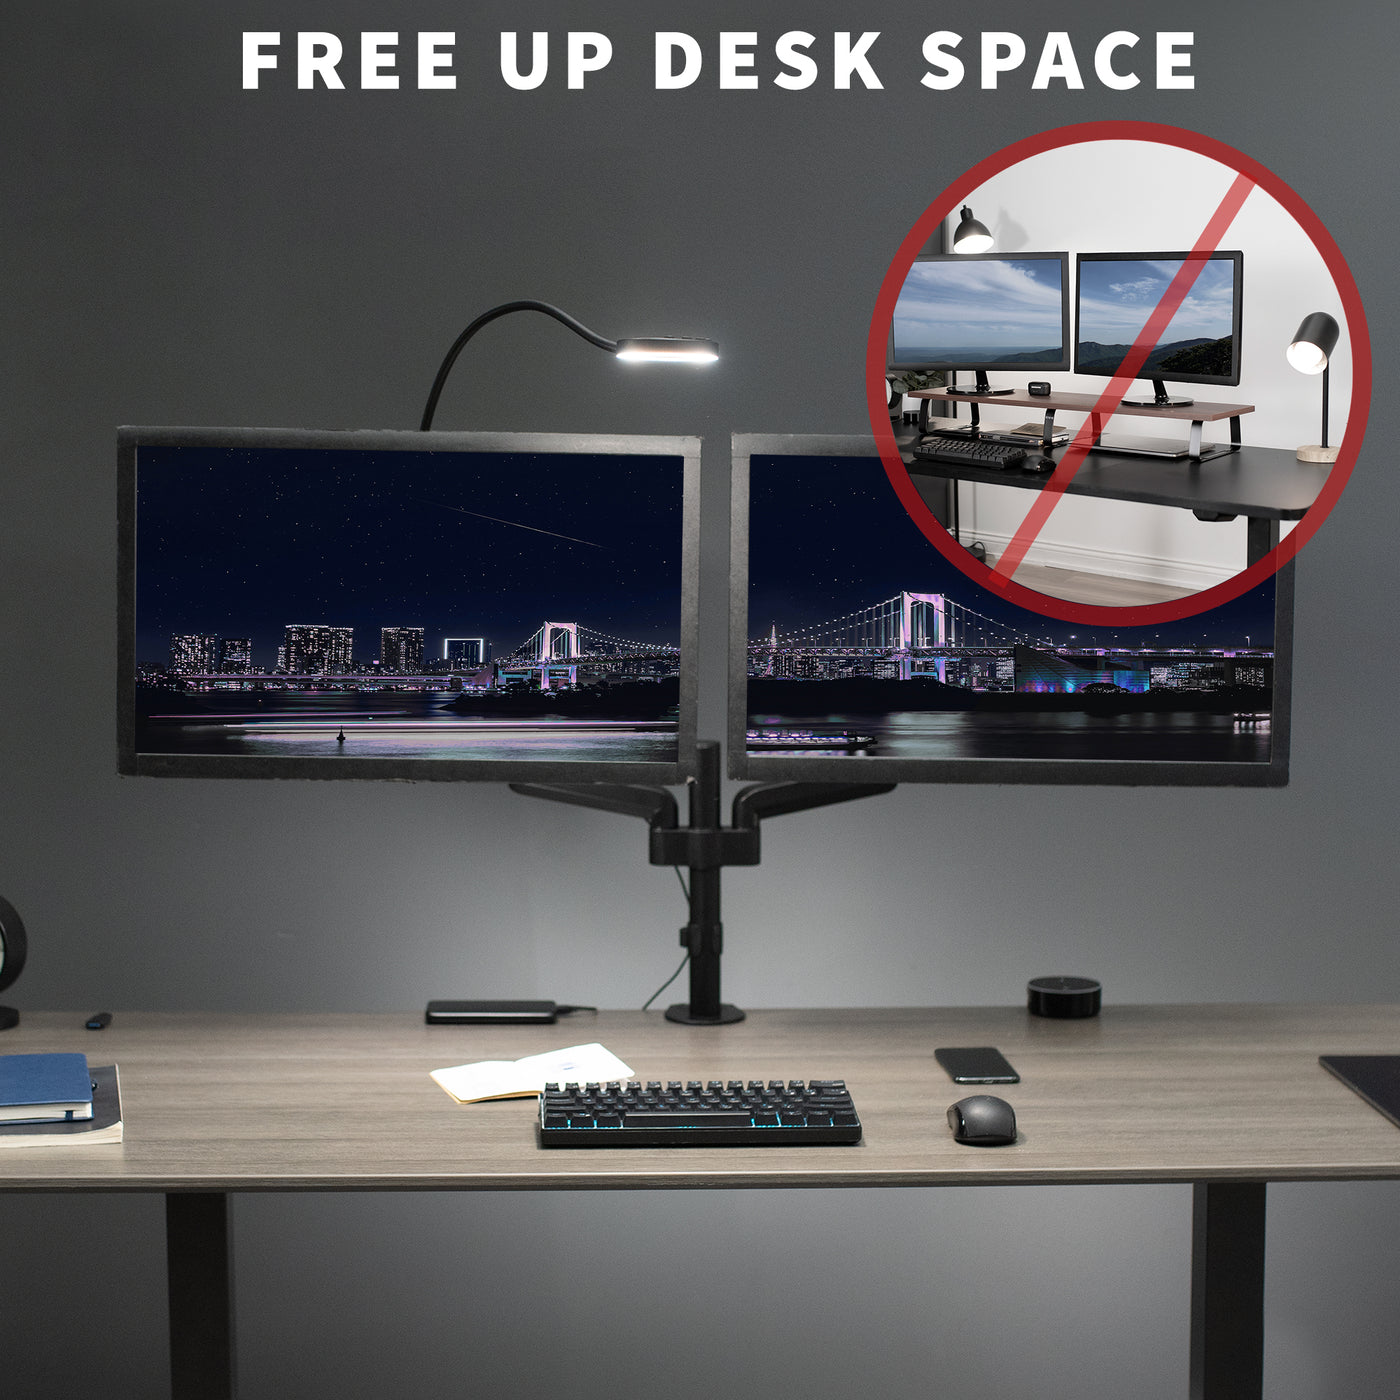  Free up desk space with a mounted light fixture.